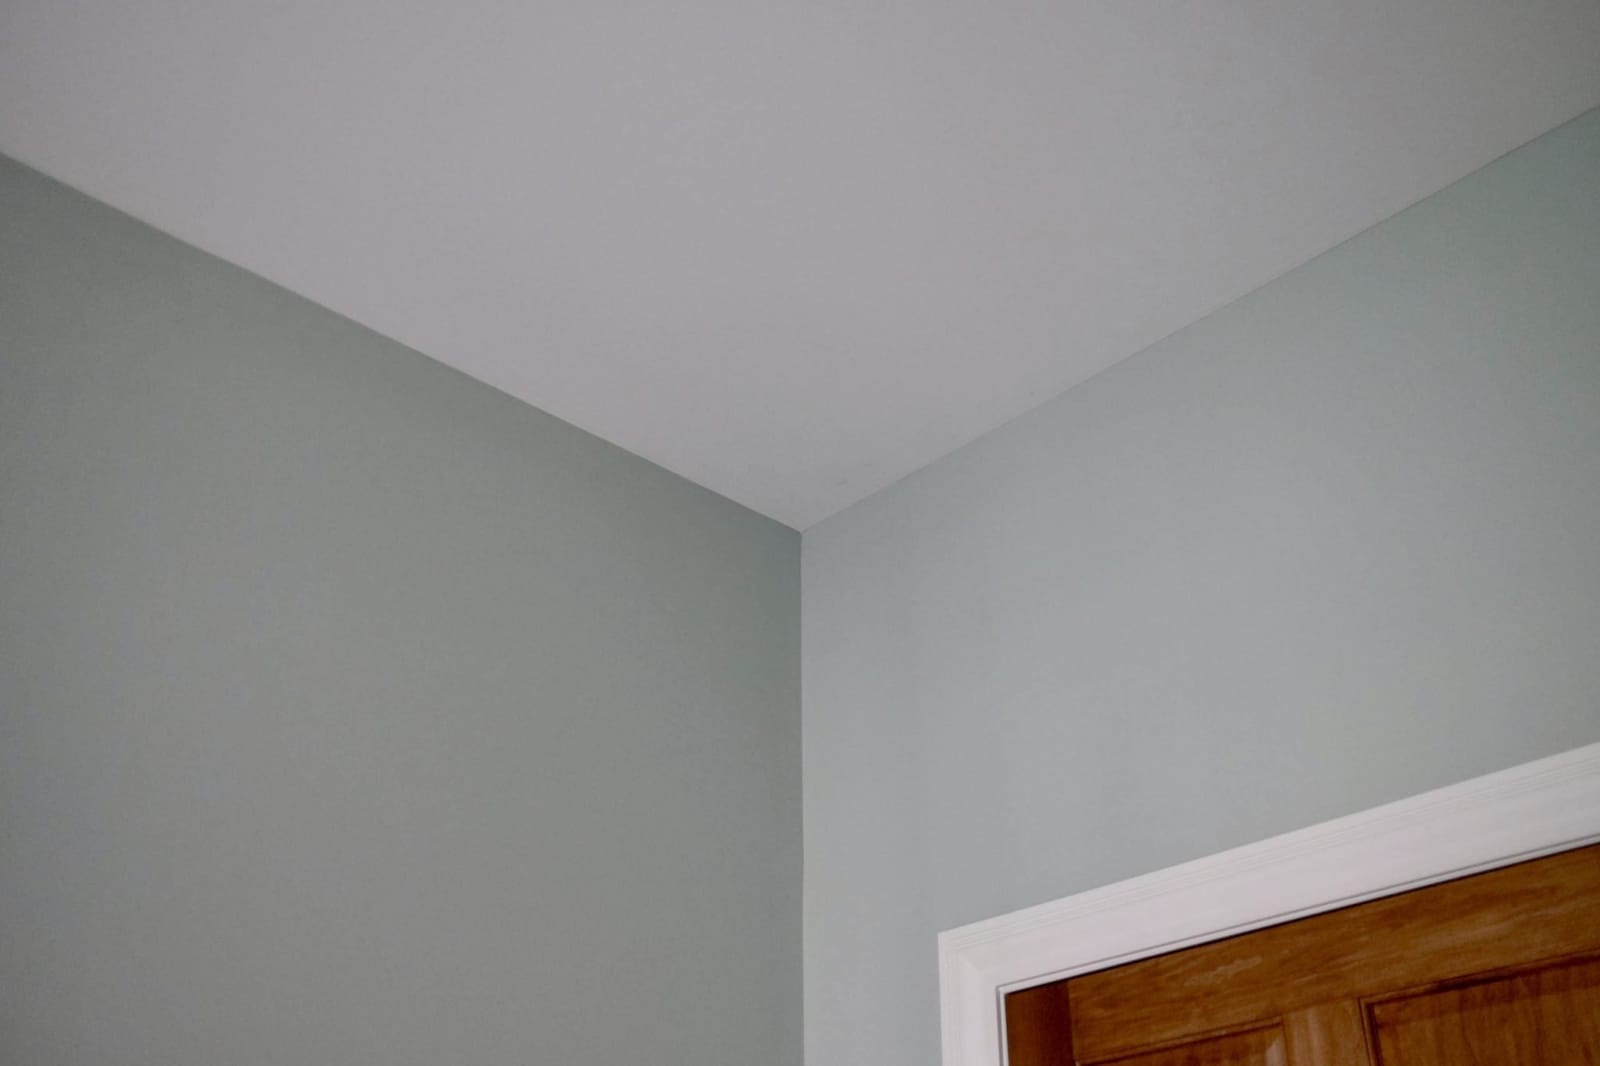 The Corners of the Ceiling